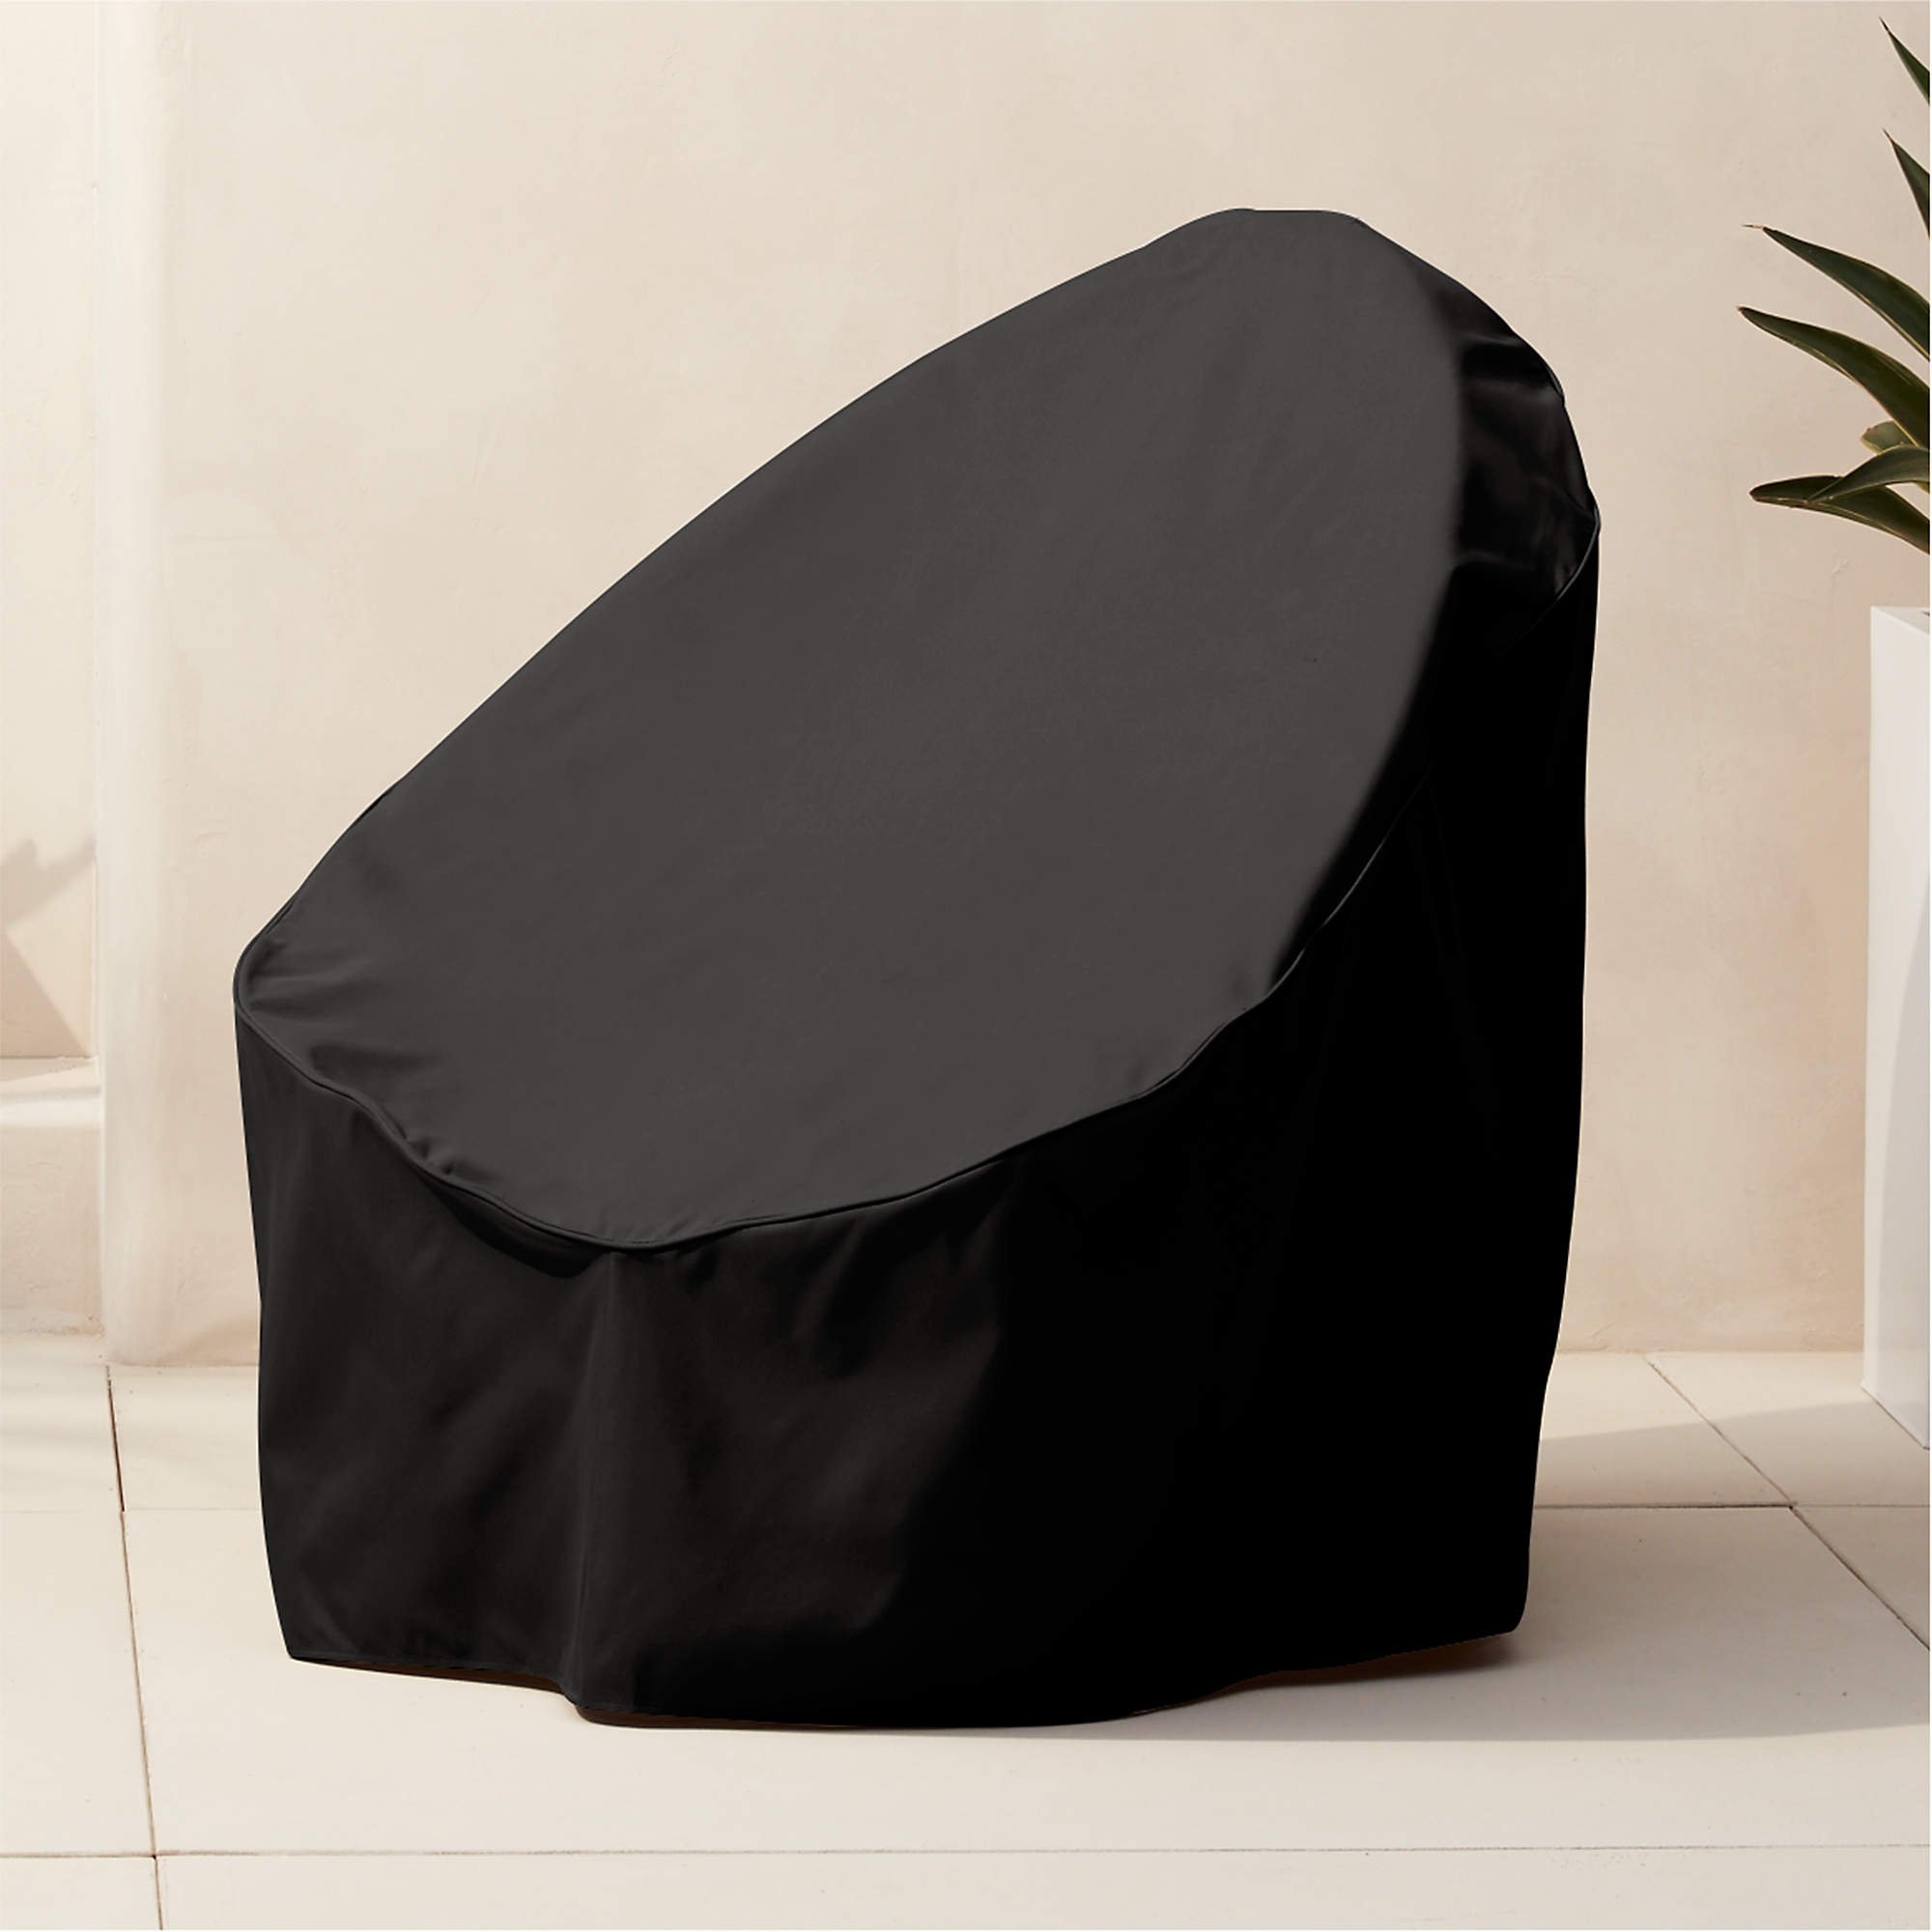 Acapulco Black Outdoor Chair - Image 8